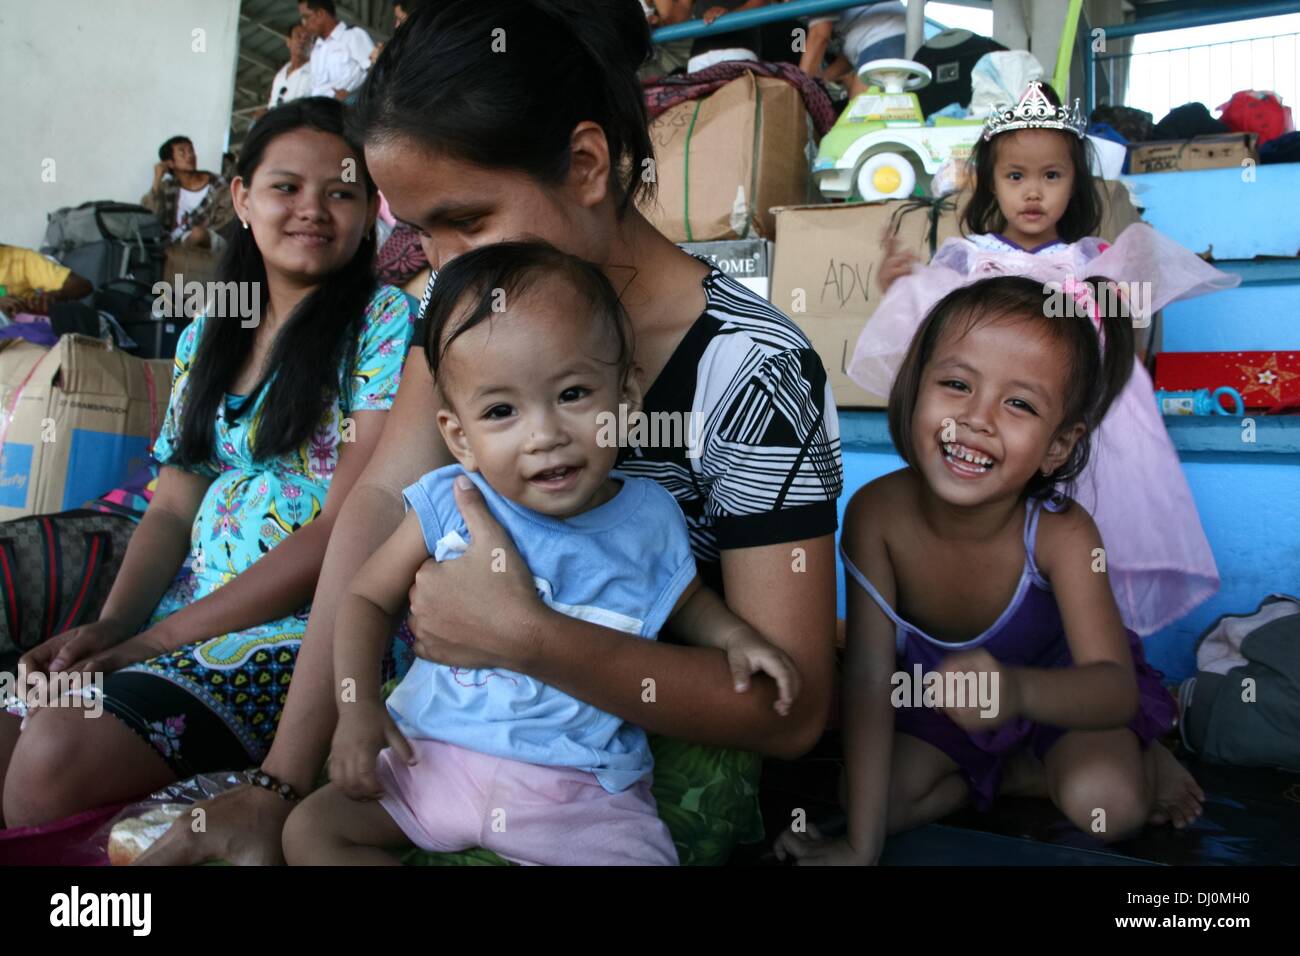 Manila, Philippines. 18th Nov, 2013. James Nathan celebrated his first birthday at the Villamor Airbase in Pasay City, South of Manila while waiting for a flight to Cebu. -- Thousands of displaced individuals from Tacloban and Ormoc City were flown to Villamor Airbase in Pasay City, South of Manila for shelter. Volunteers help feed and counsel the evacuees who suffered emotional trauma after surviving one of the biggest storms to hit land, Haiyan.Photo: J Gerard Seguia/NurPhoto Credit:  J Gerard Seguia/NurPhoto/ZUMAPRESS.com/Alamy Live News Stock Photo